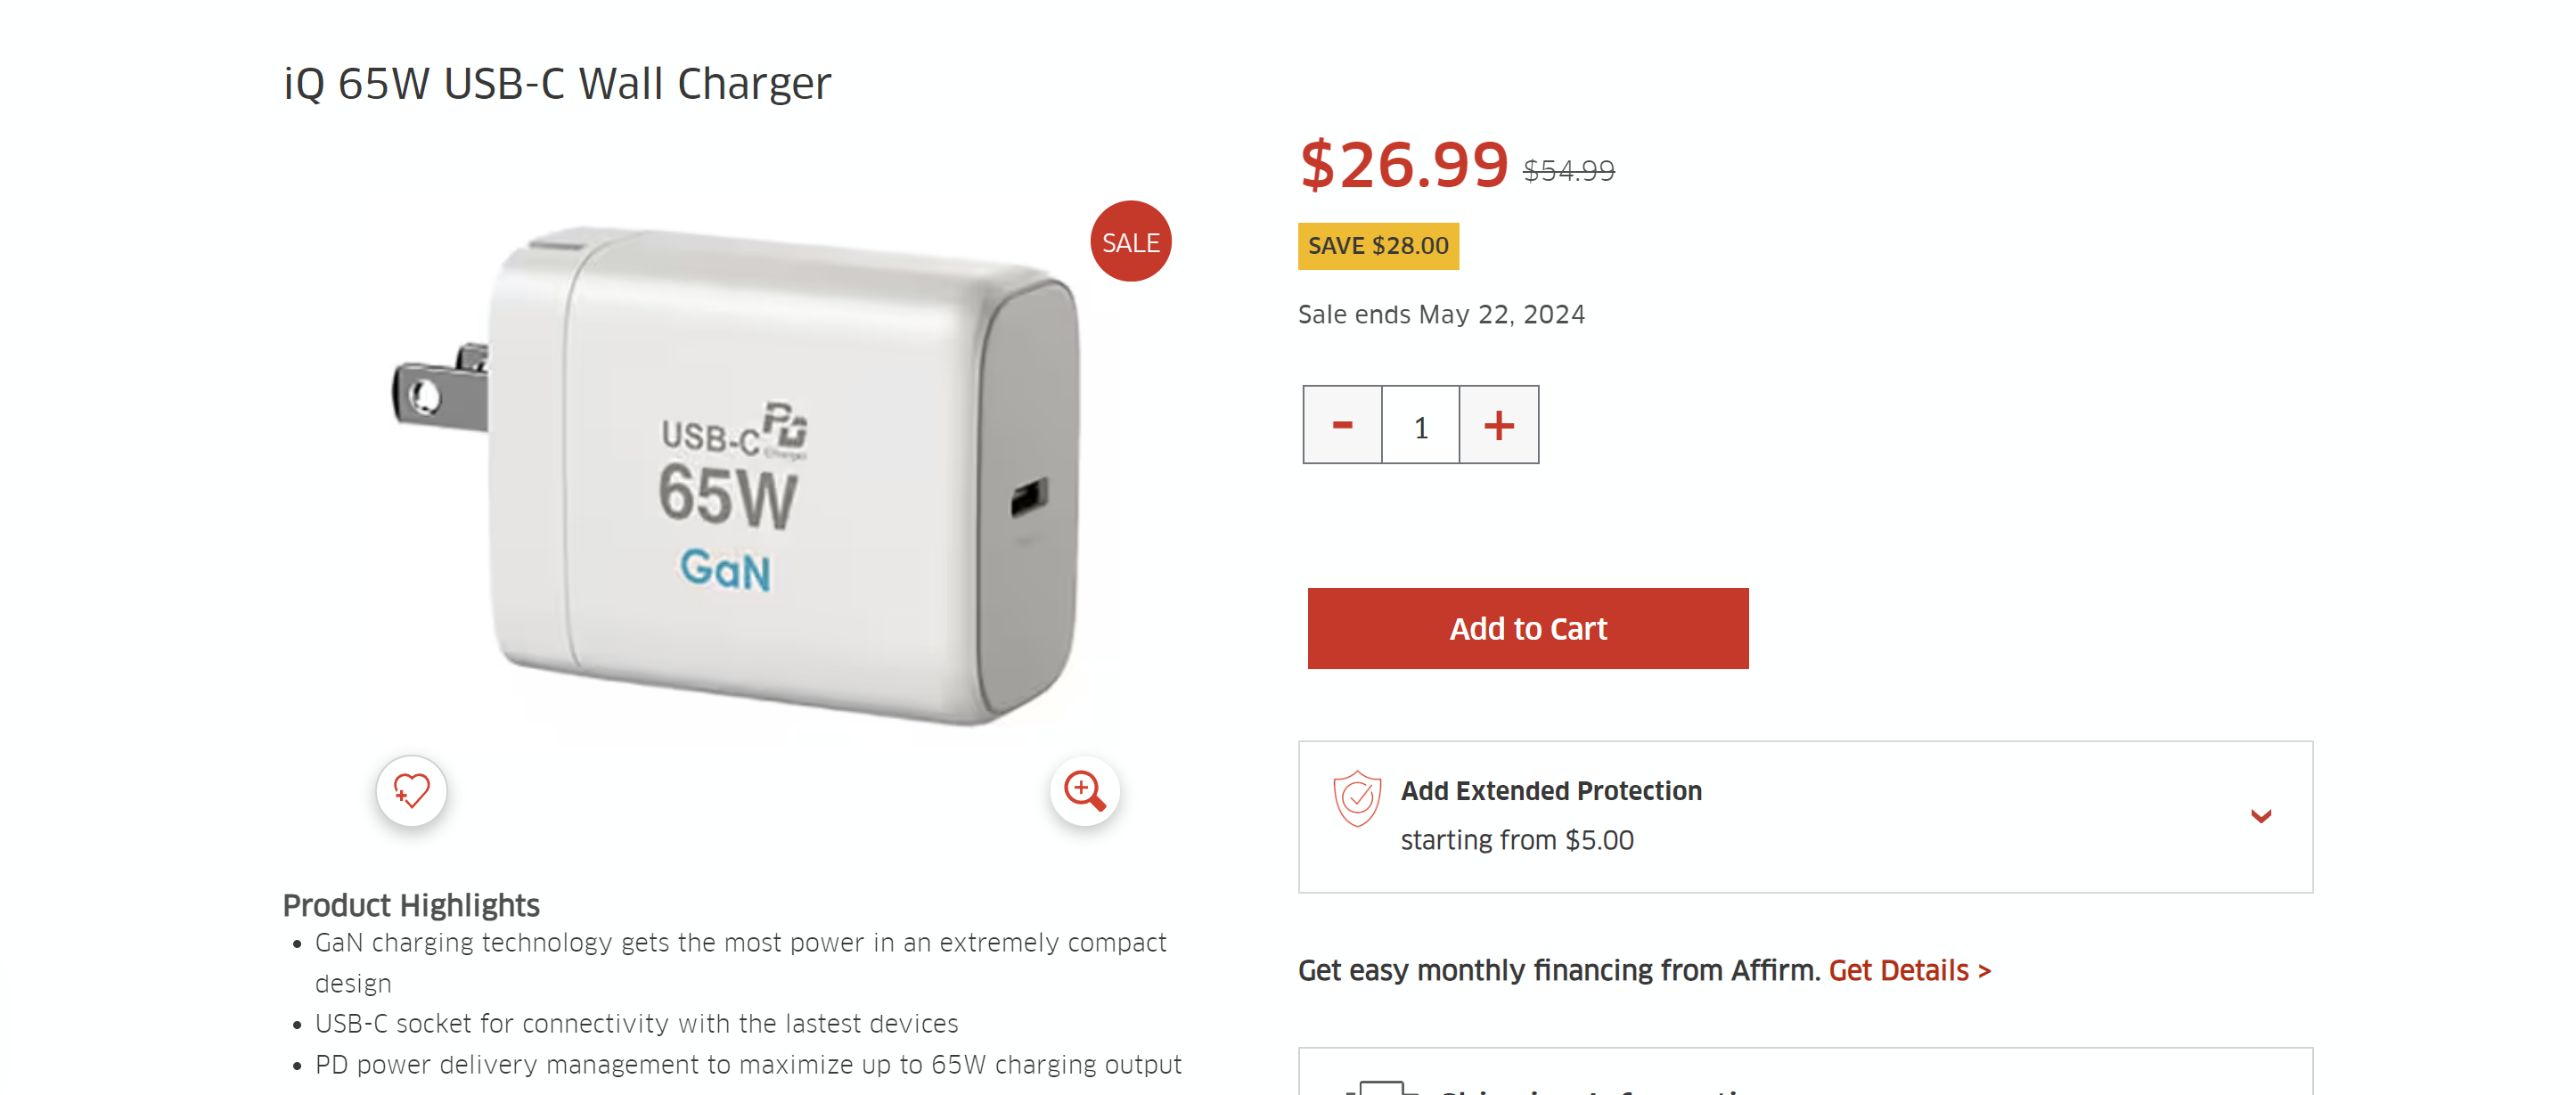 iQ 65W USB-C Wall Charger | The Source